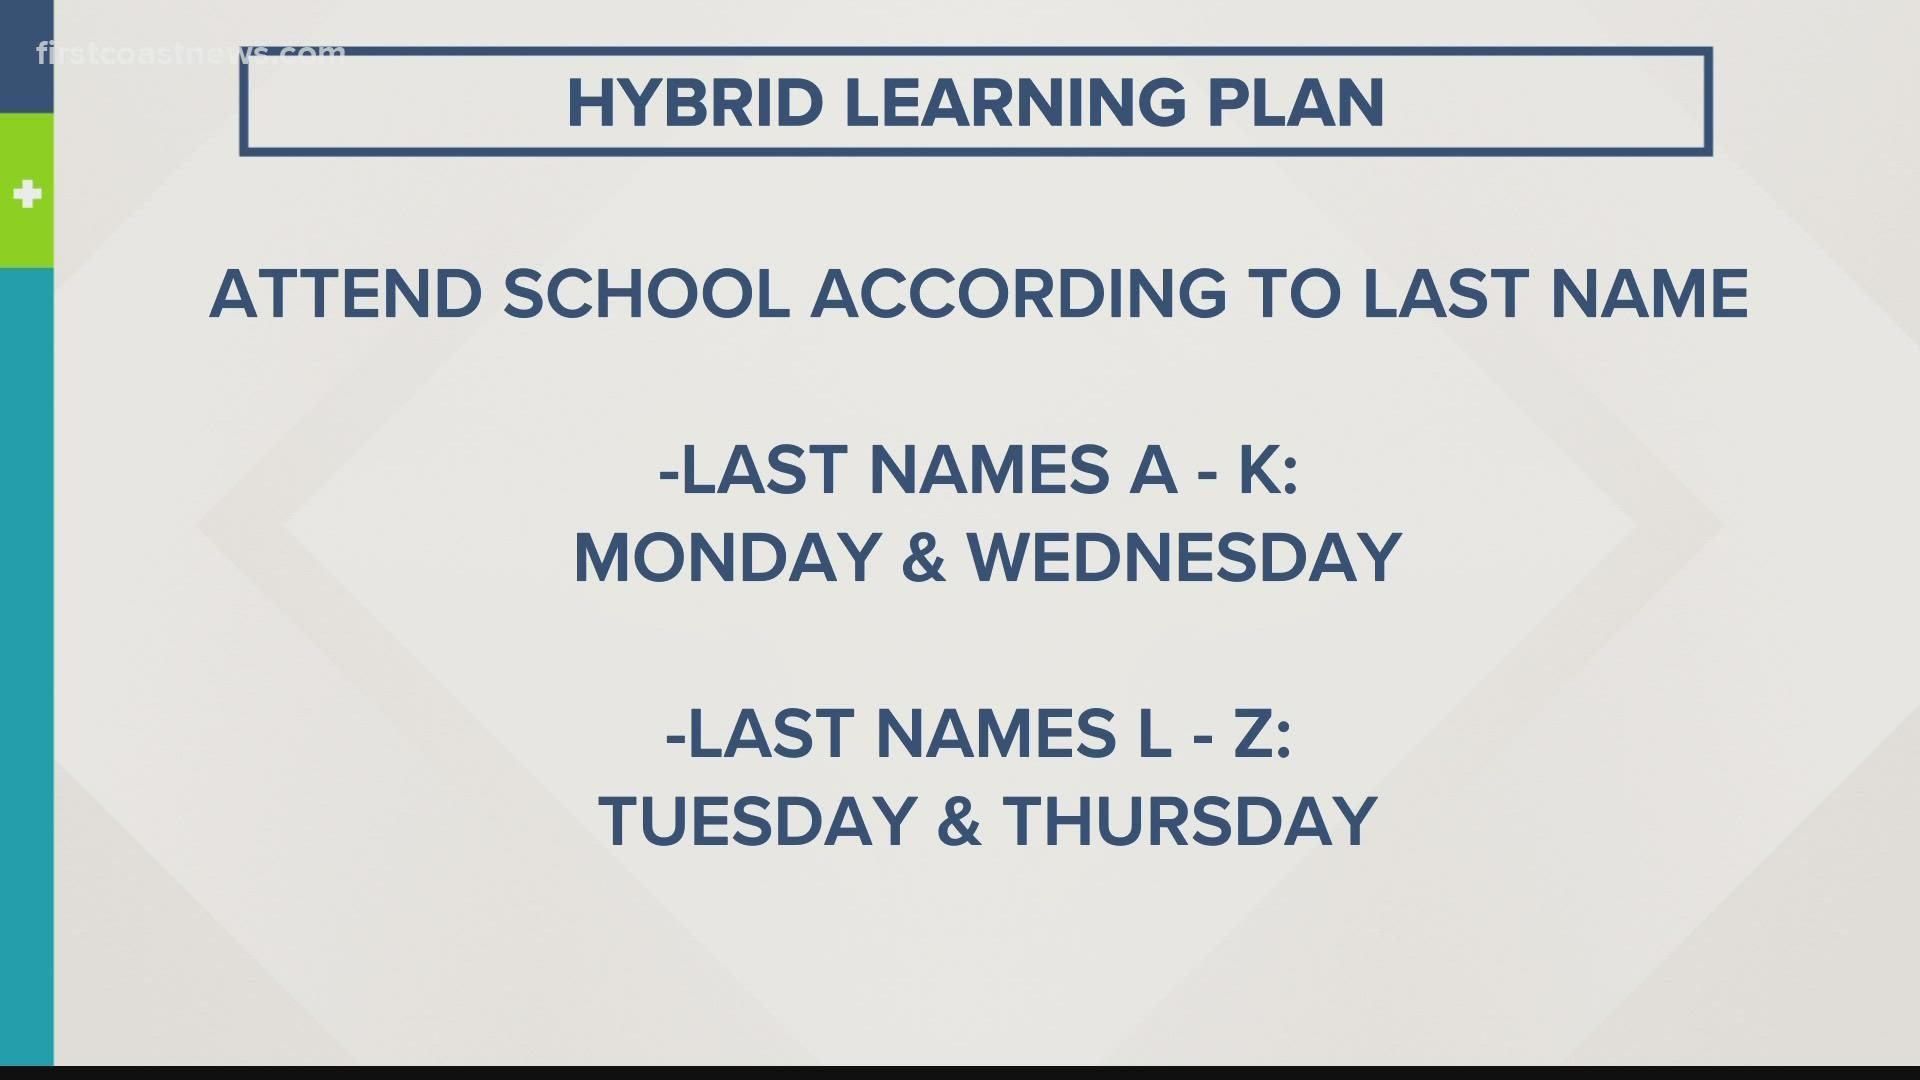 According to the new plan, students will attend classes twice a week with assignments to be completed the other three days.